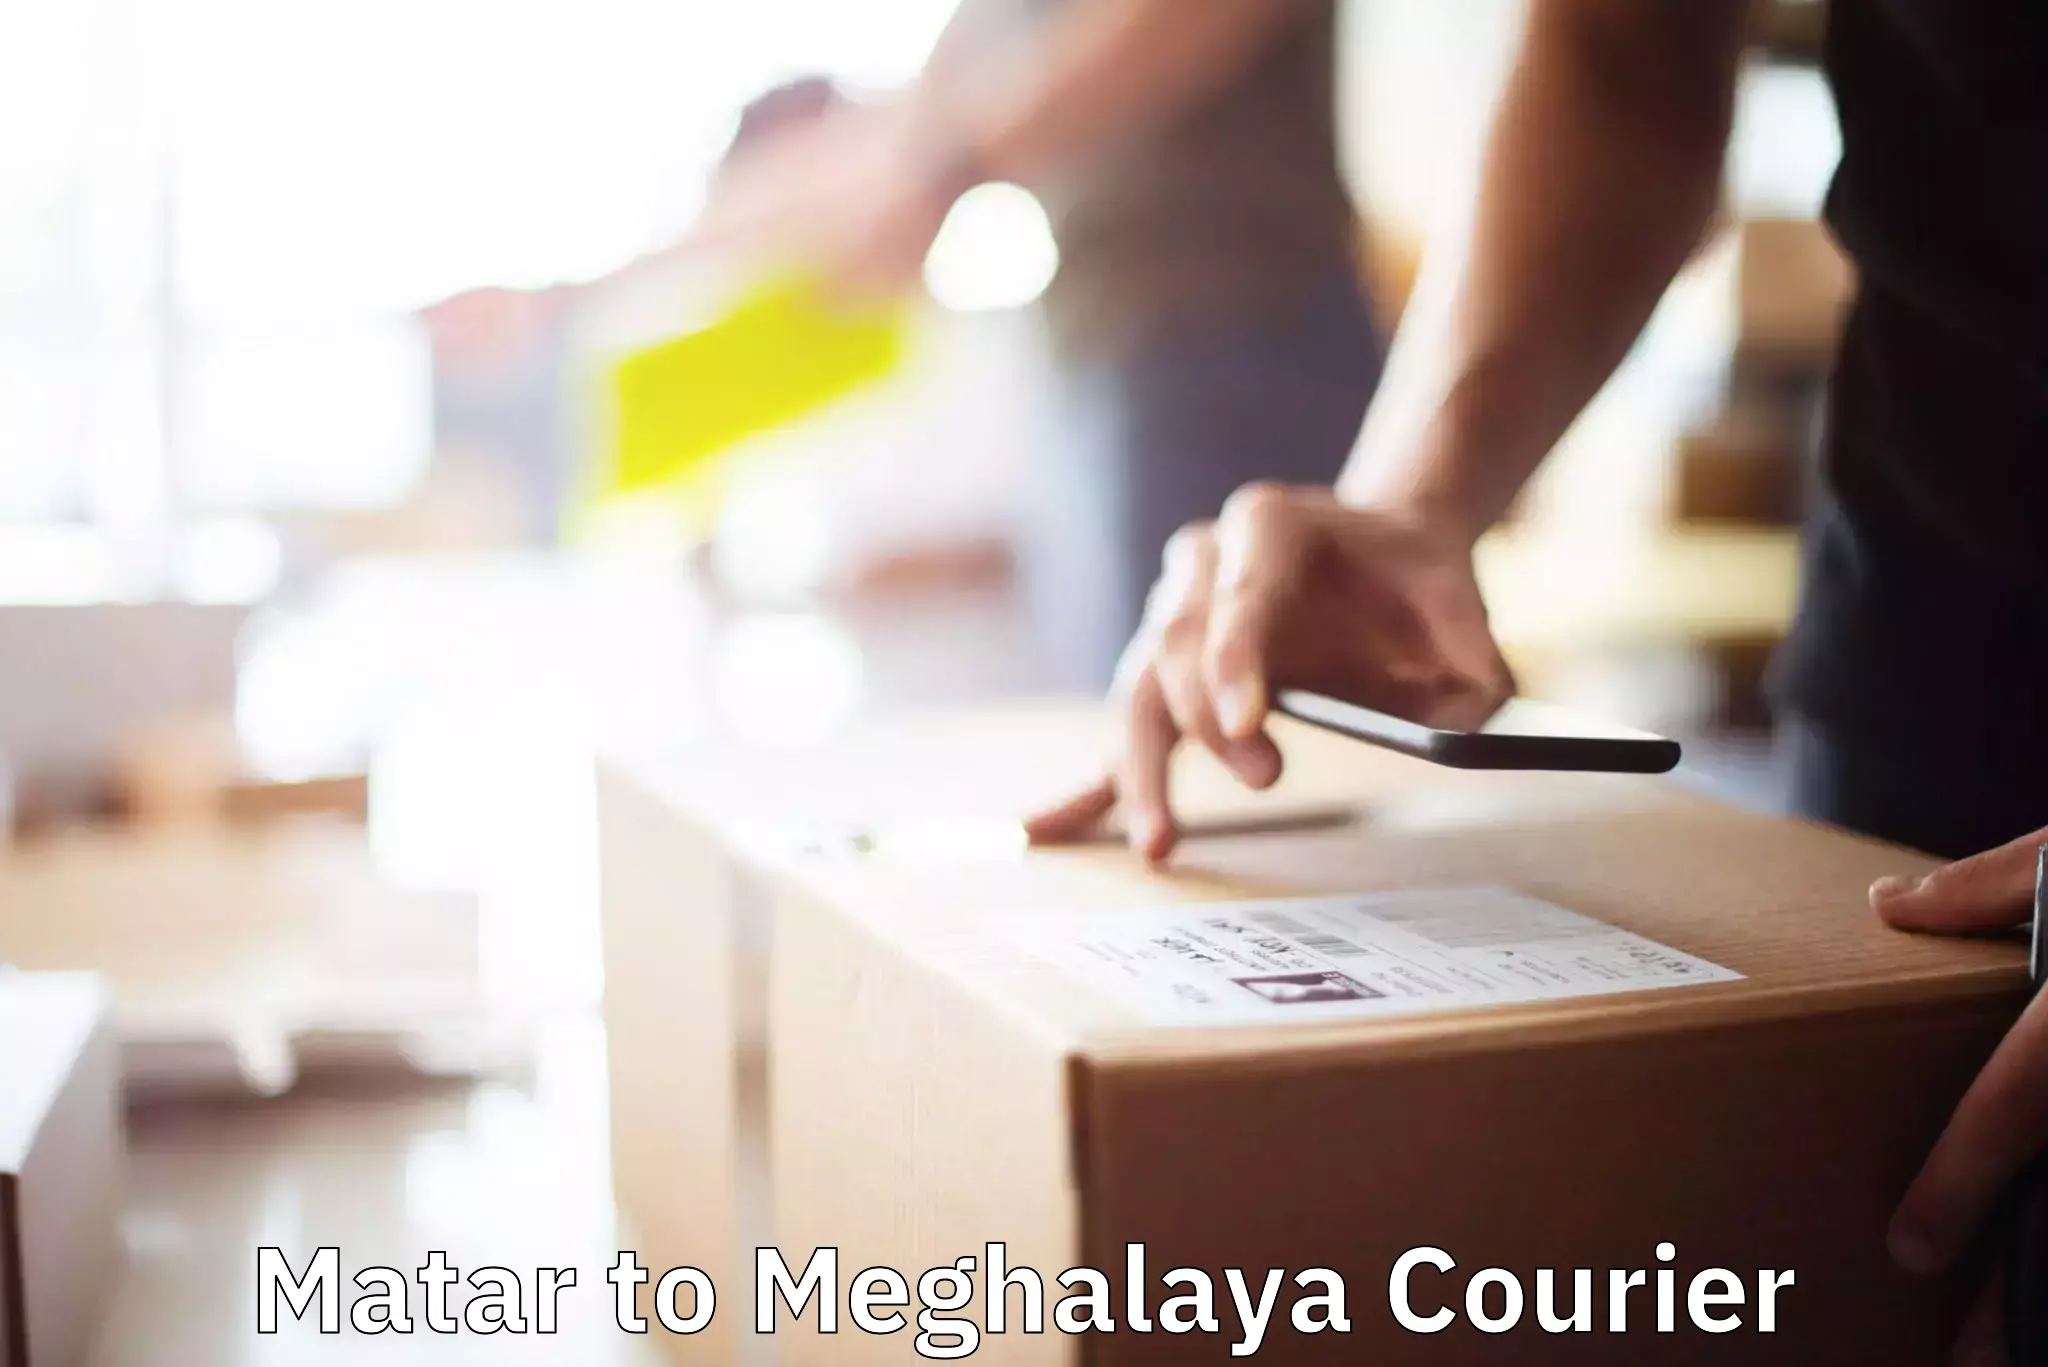 Affordable relocation services Matar to Meghalaya